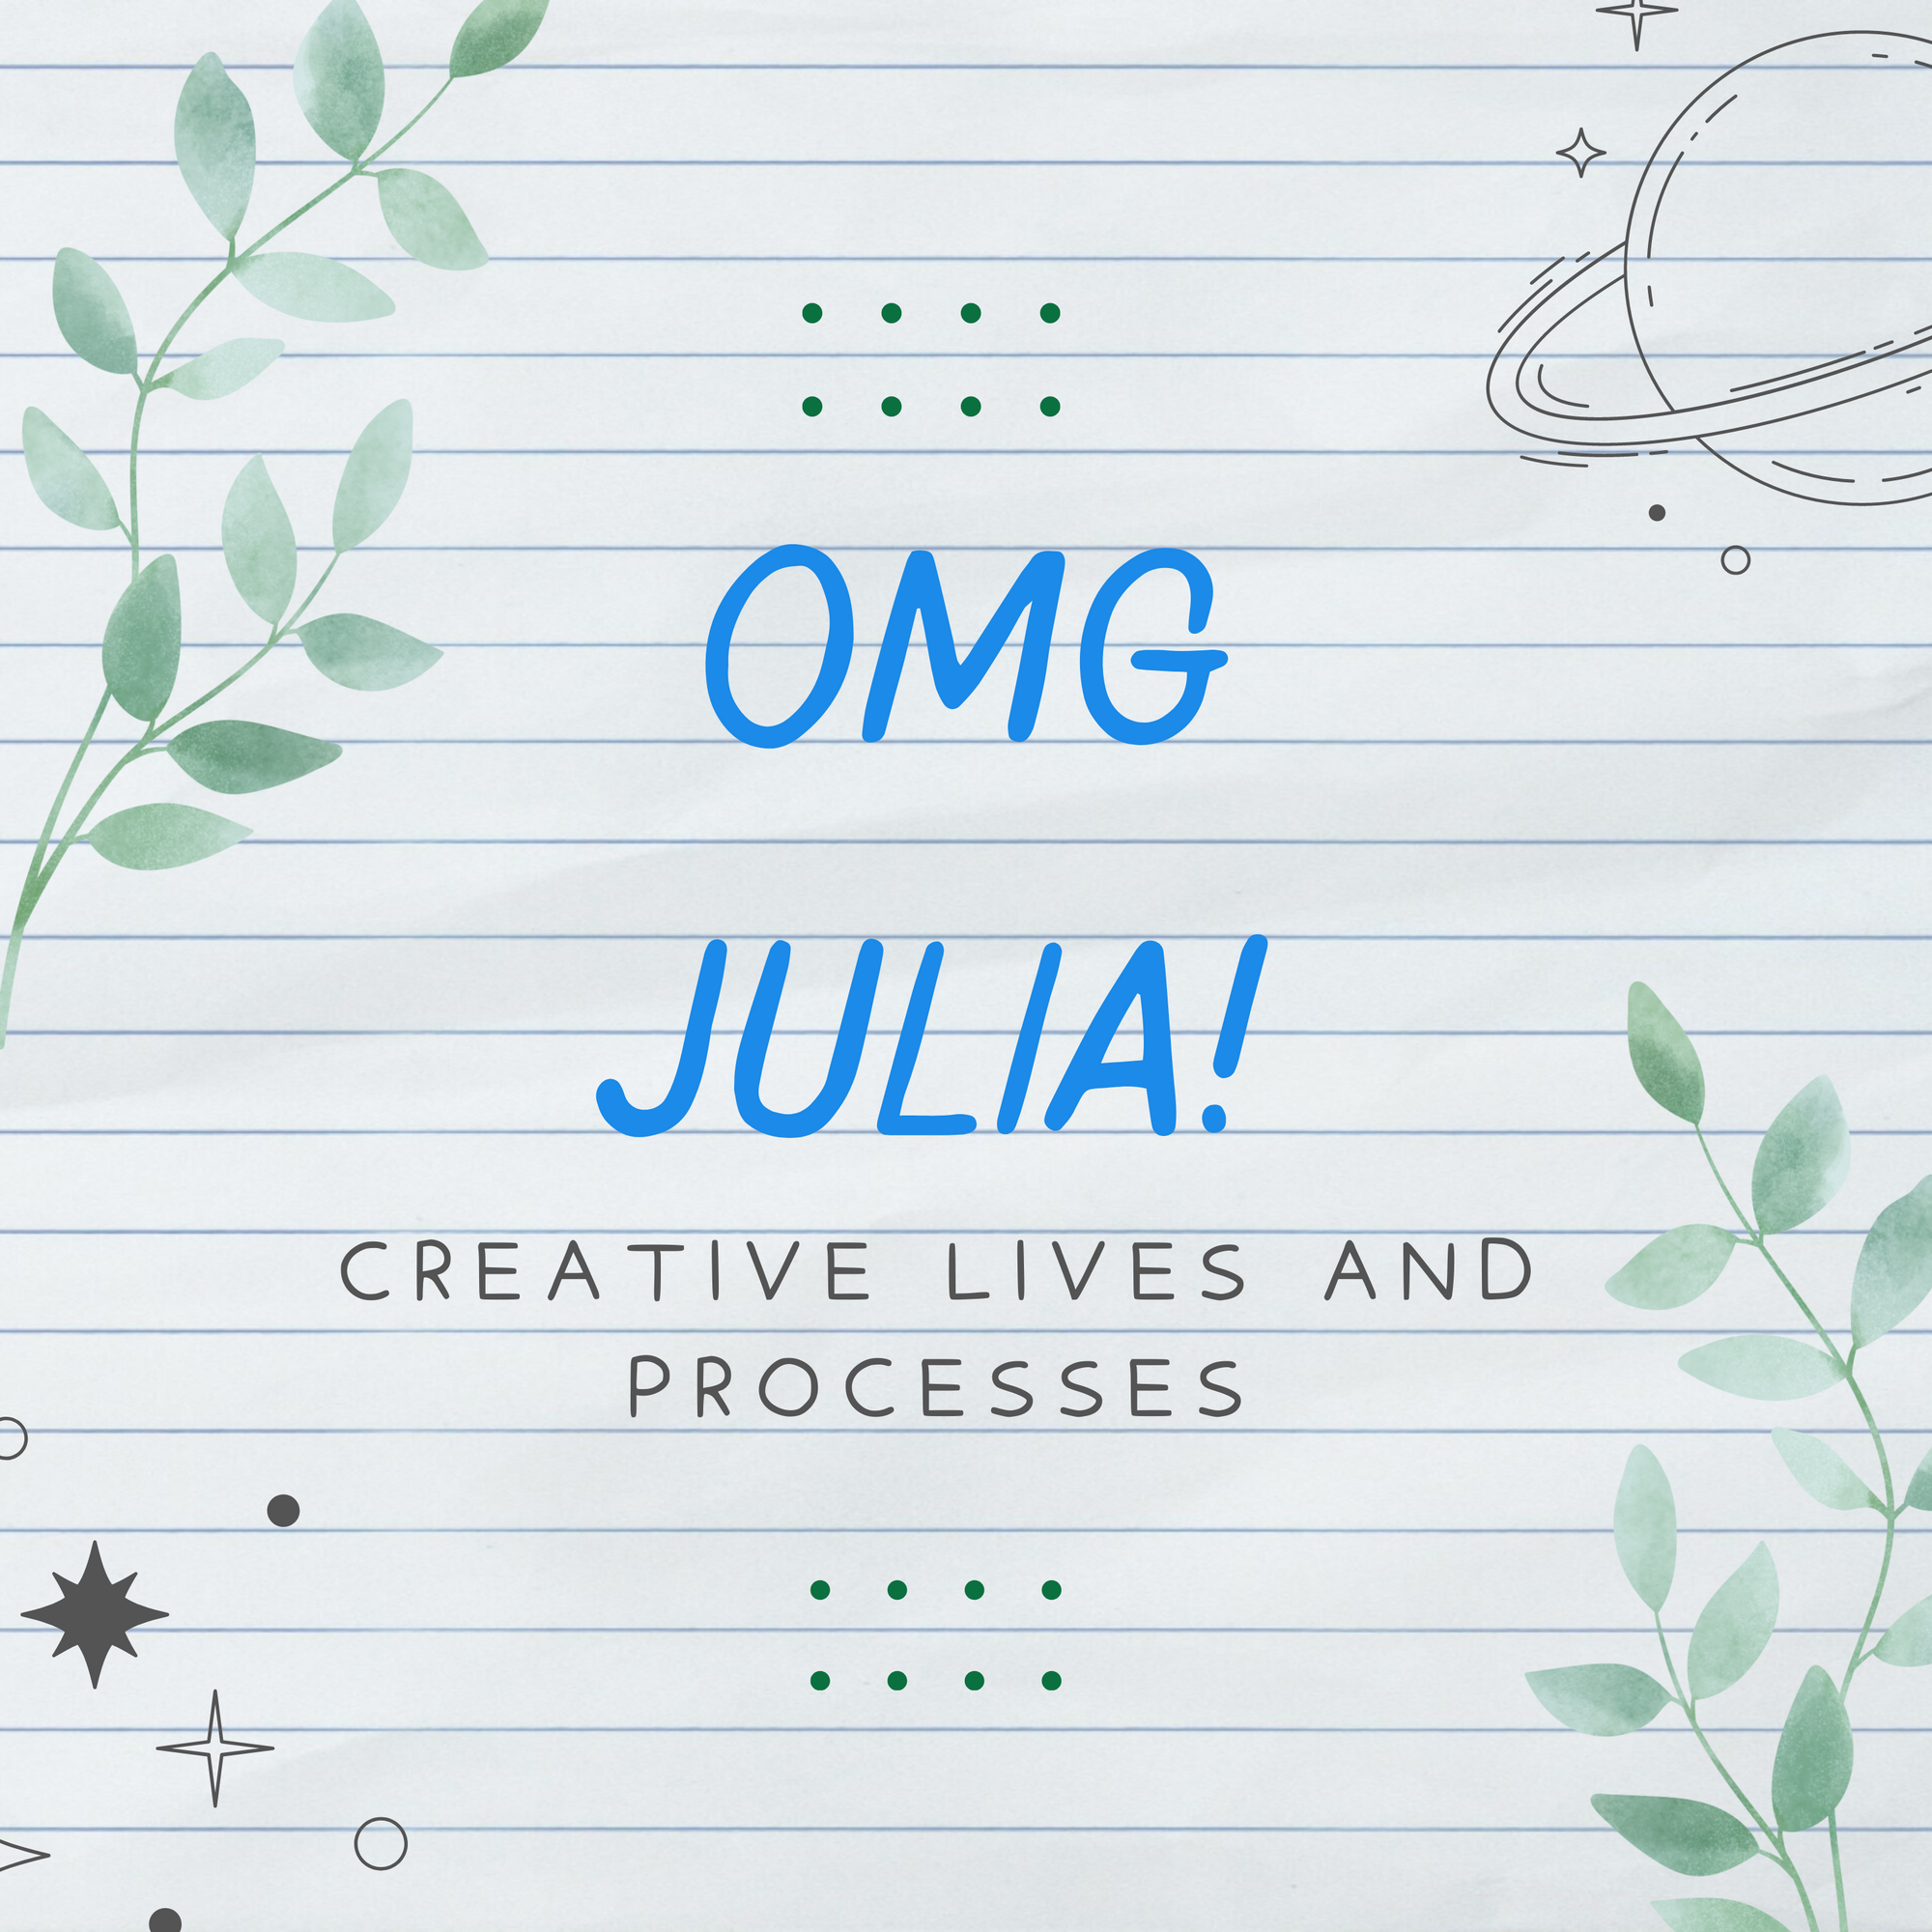 OMG Julia! Creative Lives and Processes. Text appears alongside doodles of stars and planets and leaves.